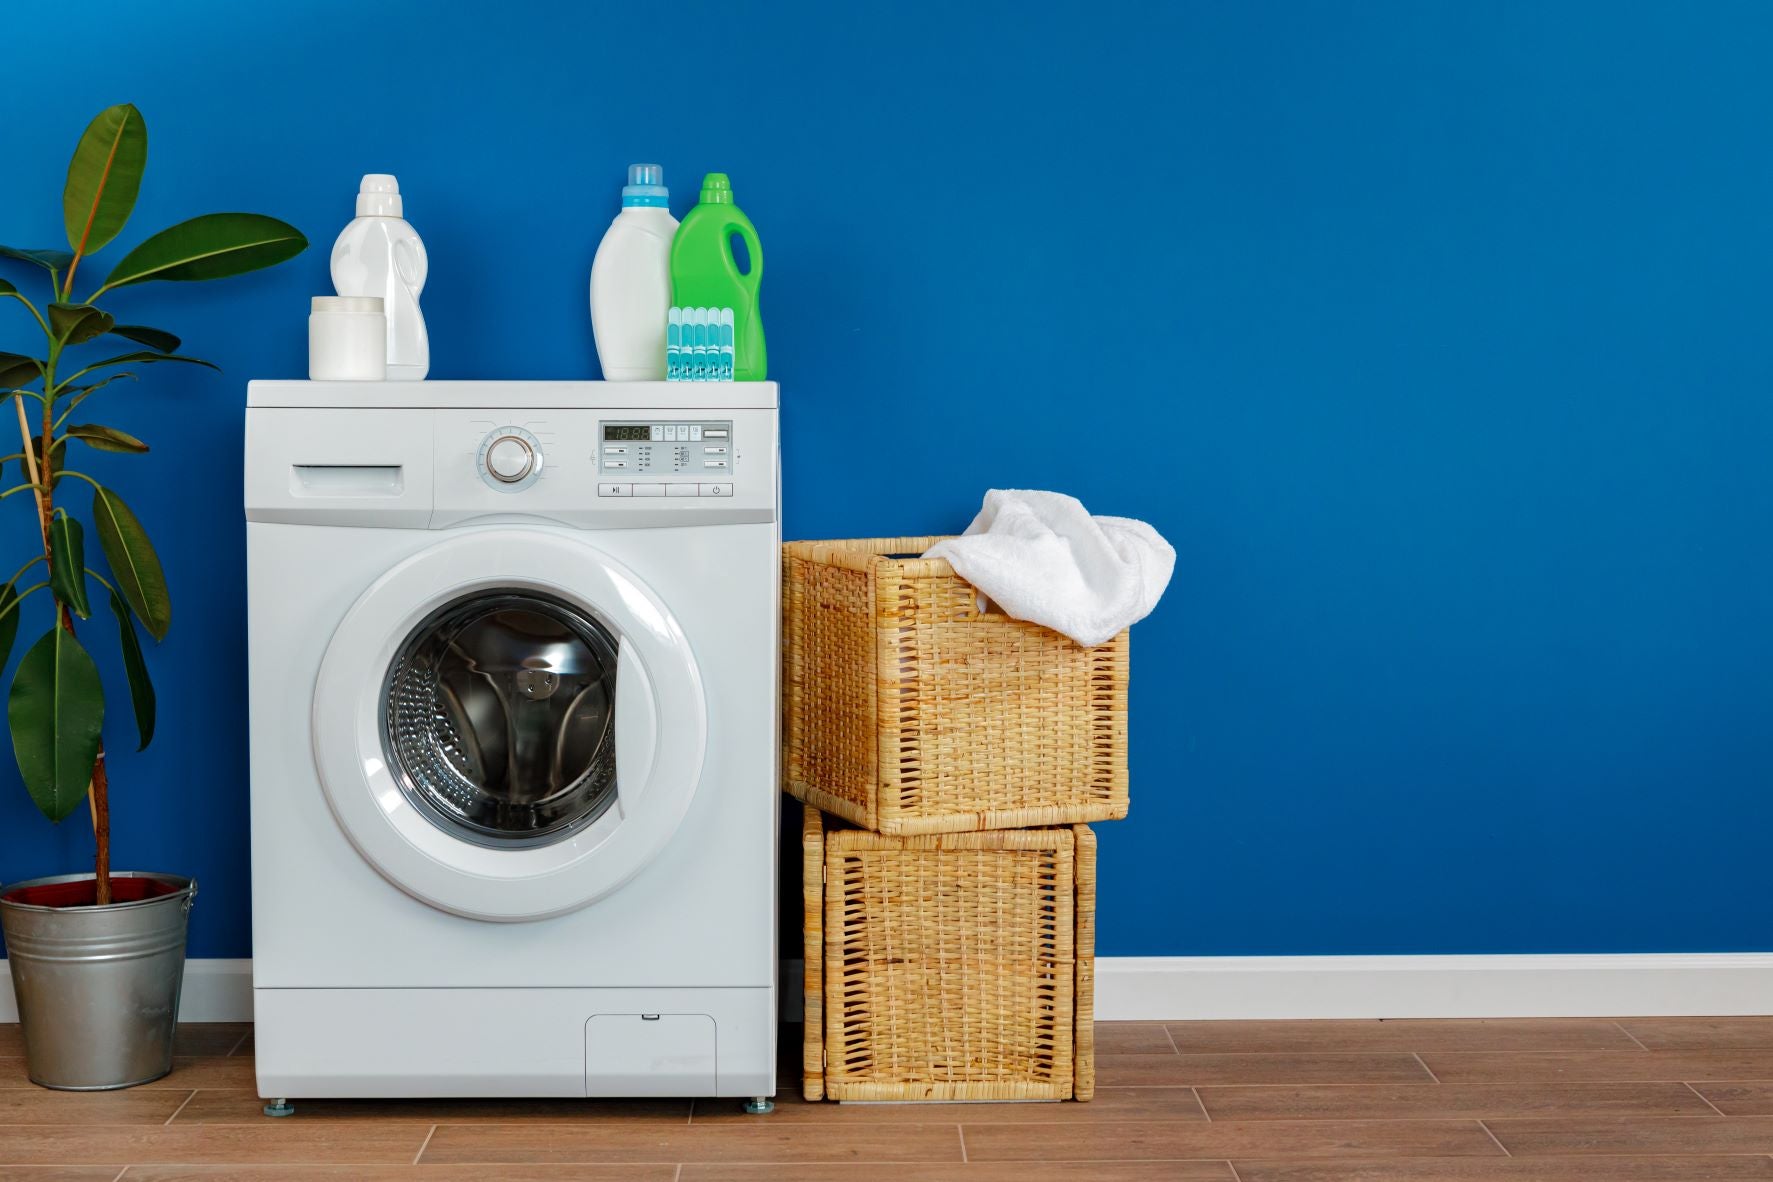 Why do you need to wash your pillow, washing machine with detergent and laundry basket for washing pillows